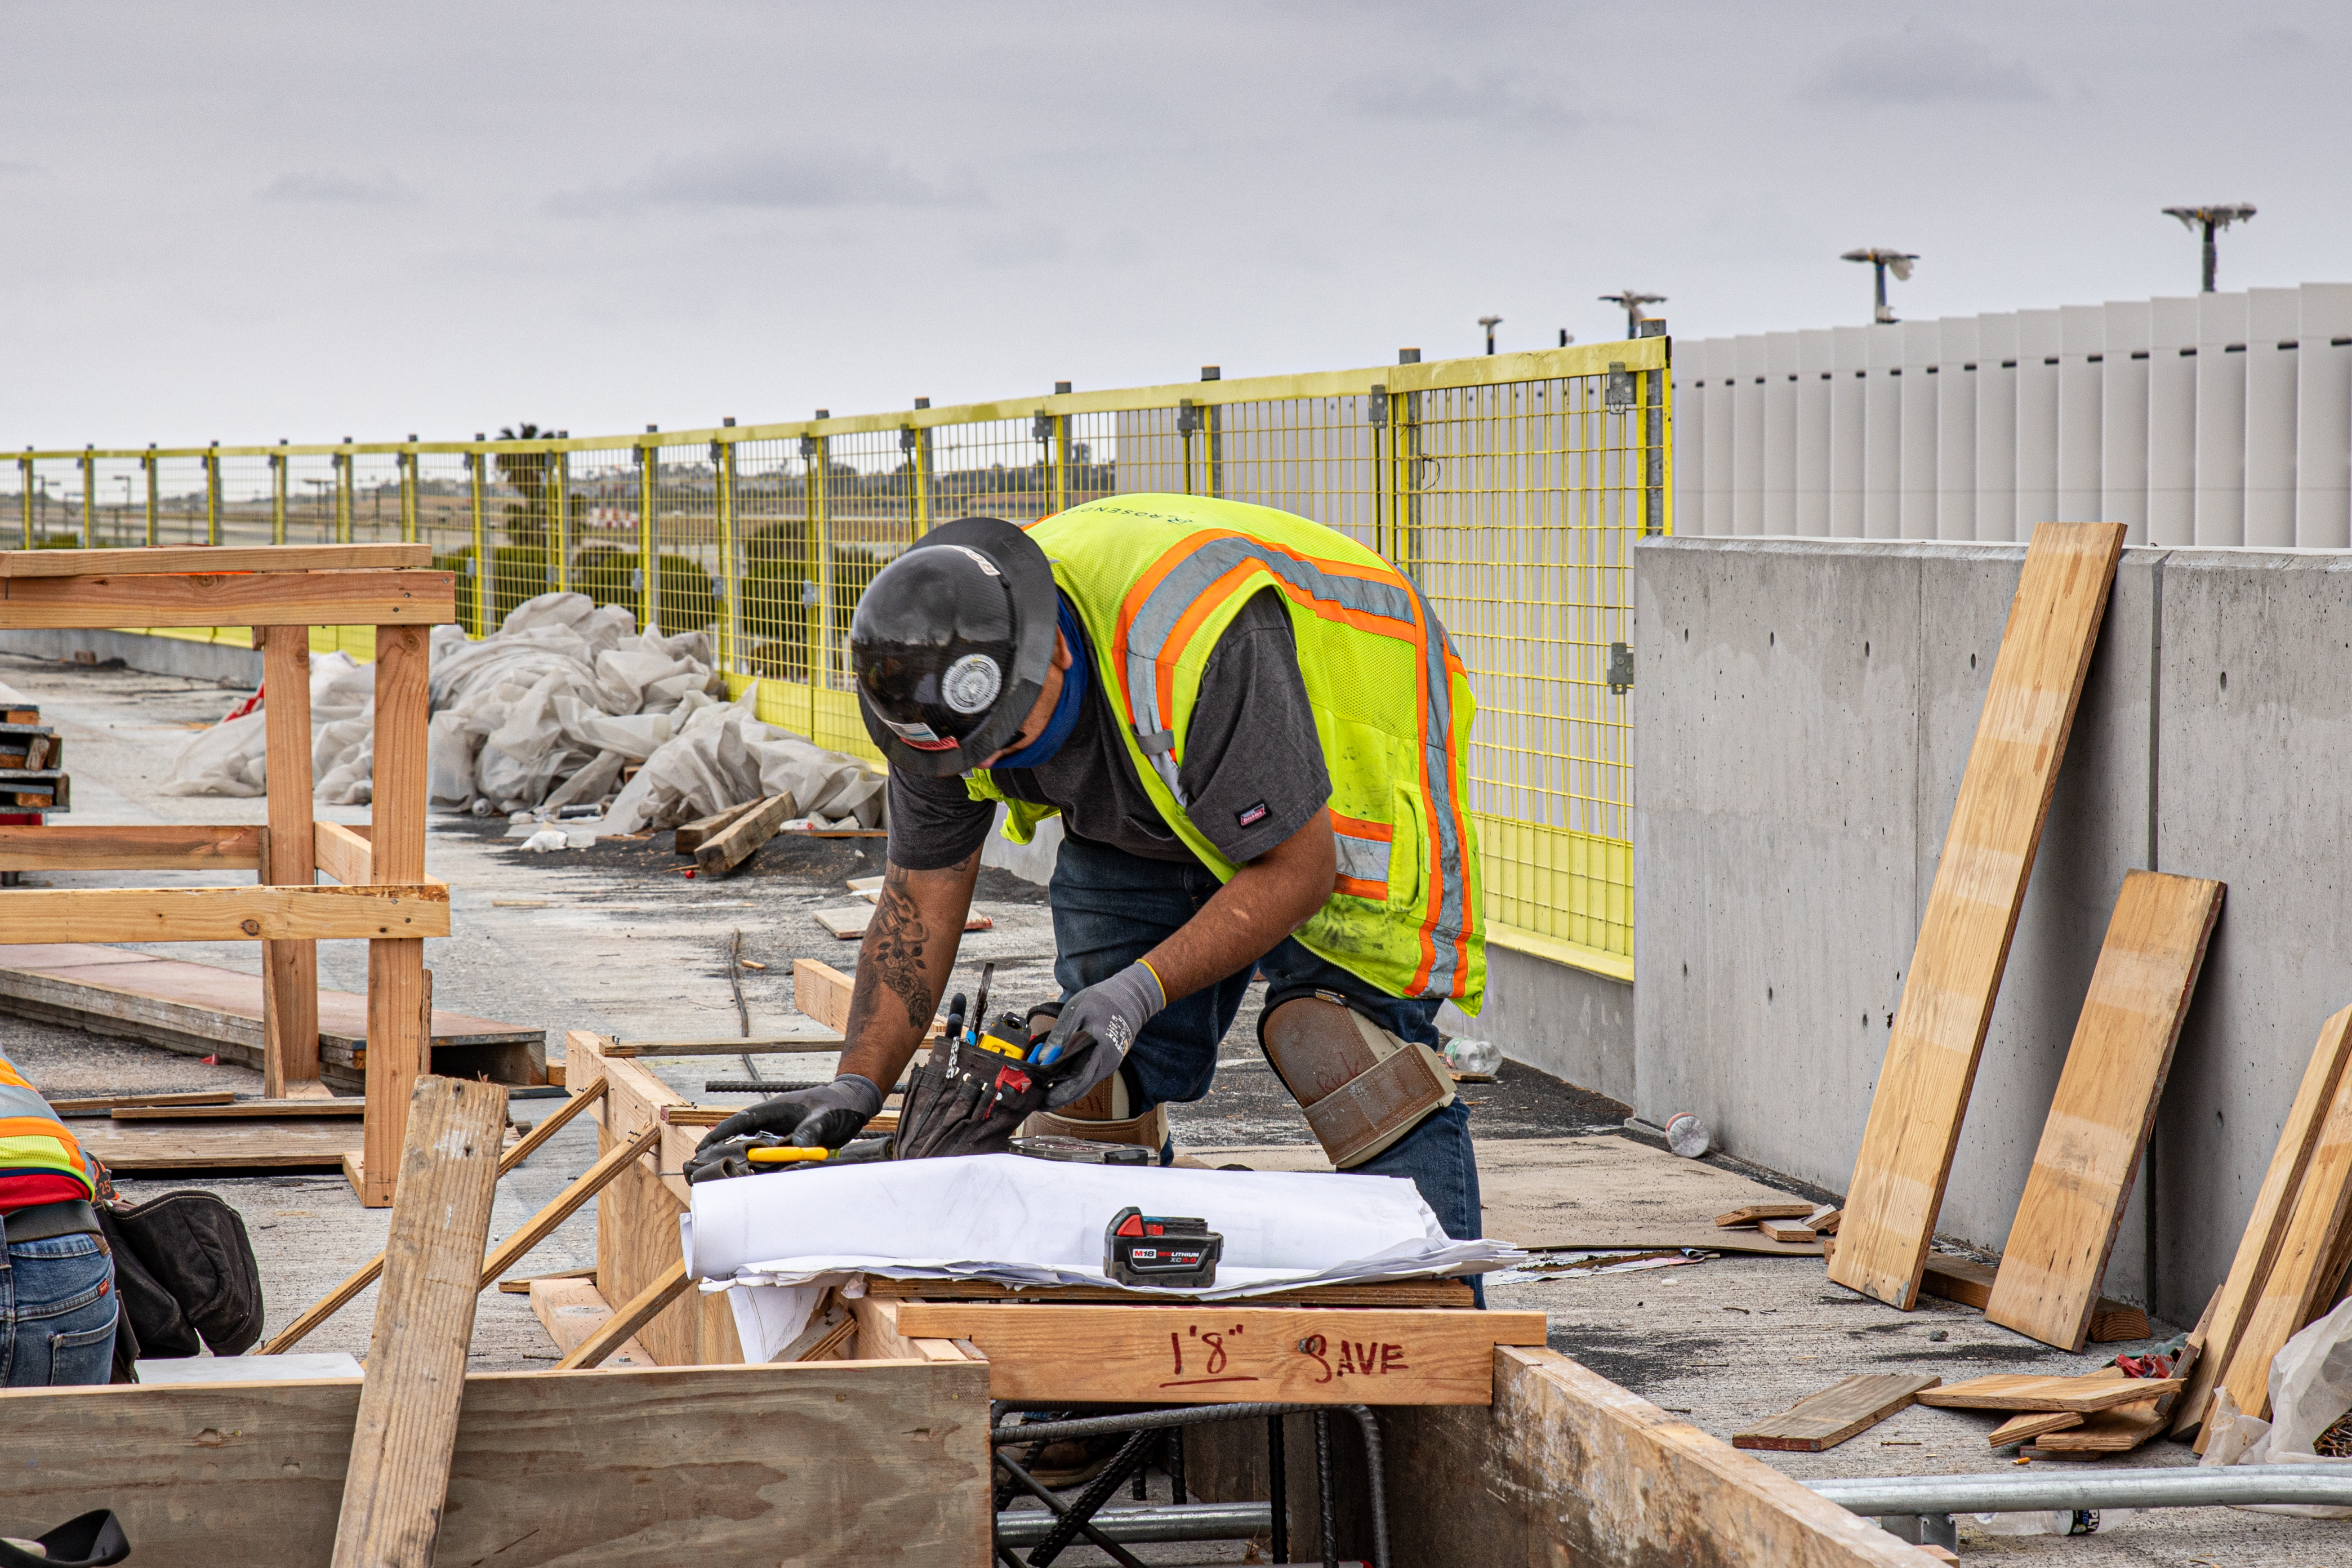 Building the Automated People Mover requires the cooperation and teamwork of a diverse craft workforce, with specialties that include electricians, carpenters, laborers, masons and more.